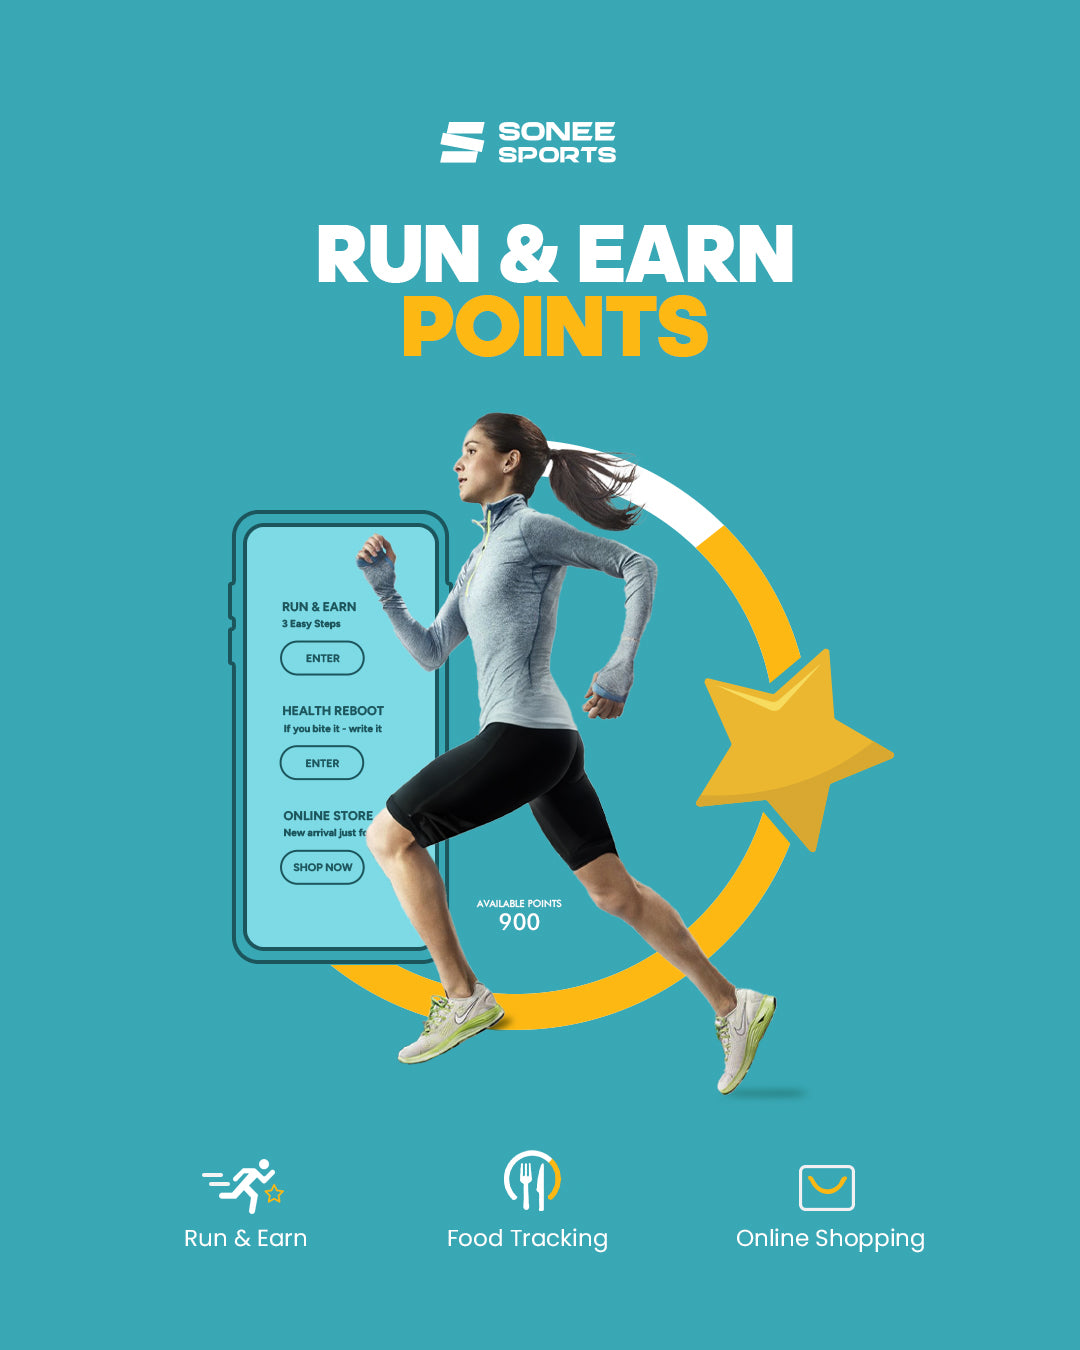 Run and earn points finall 2